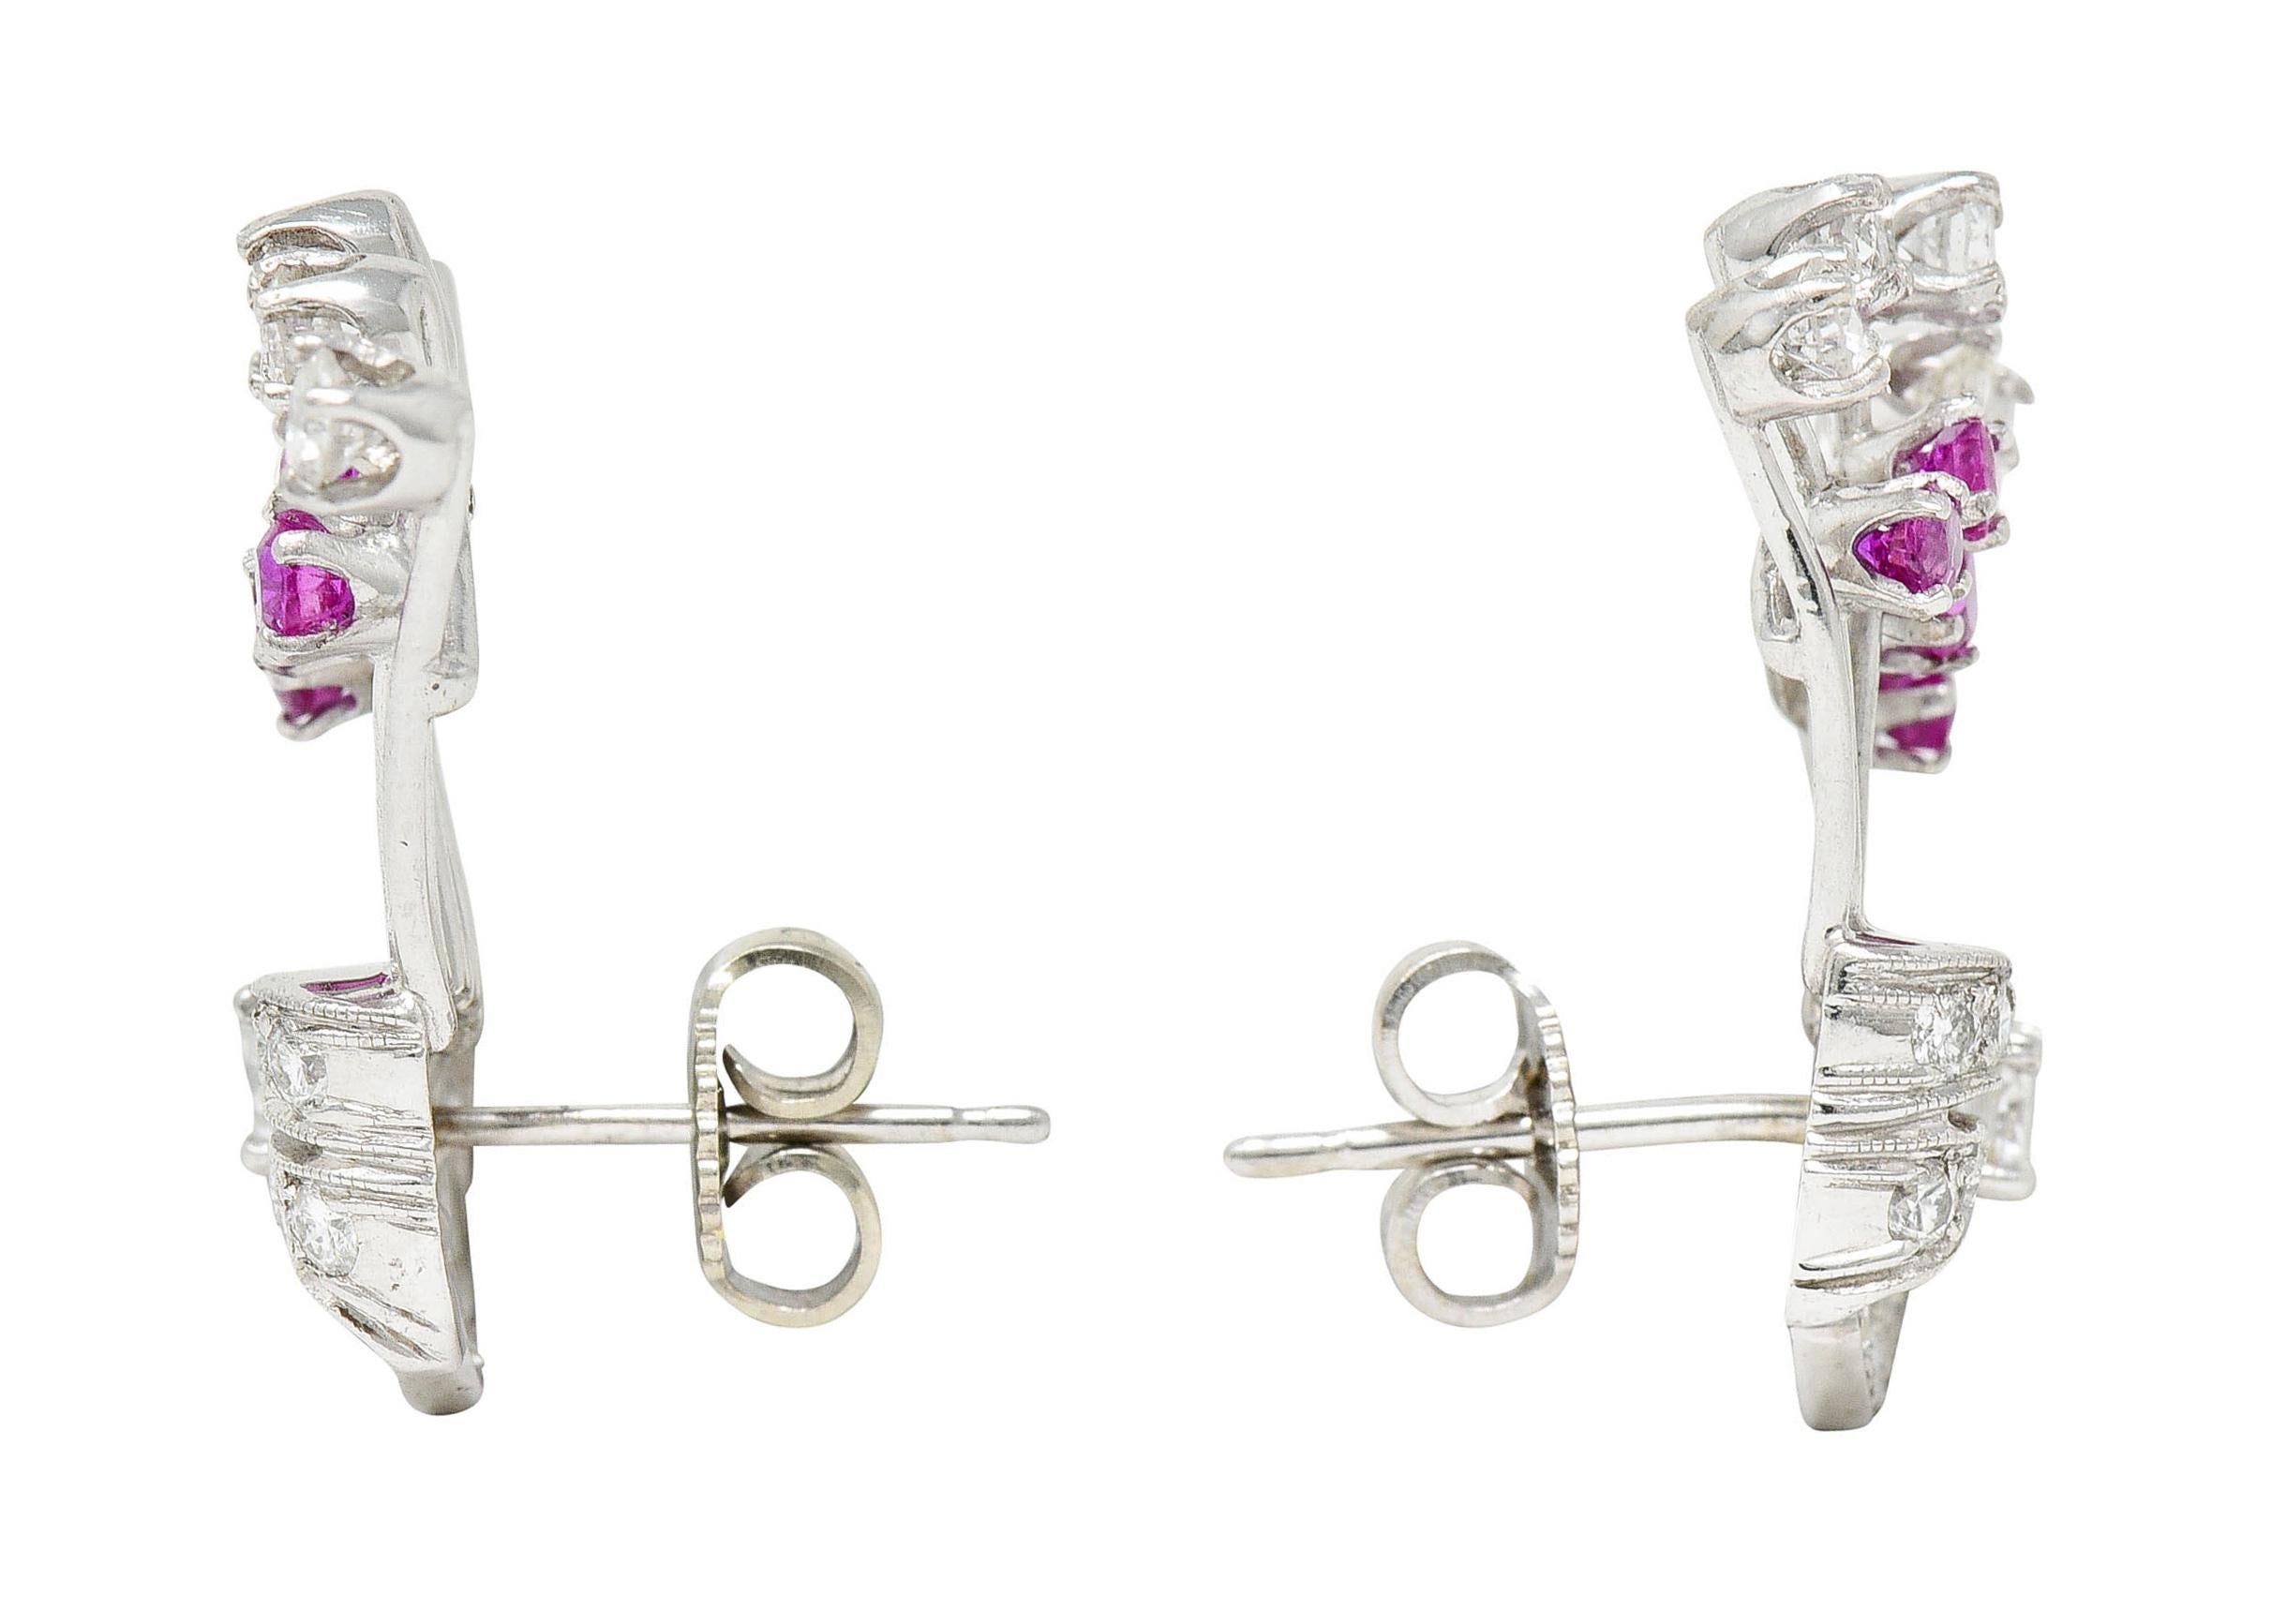 Earrings are designed as ribboned forms with gemmed extensions

Set throughout by round brilliant cut diamonds

Weighing in total approximately 1.30 carats with G to I color and SI clarity

Accented by round cut rubies weighing in total